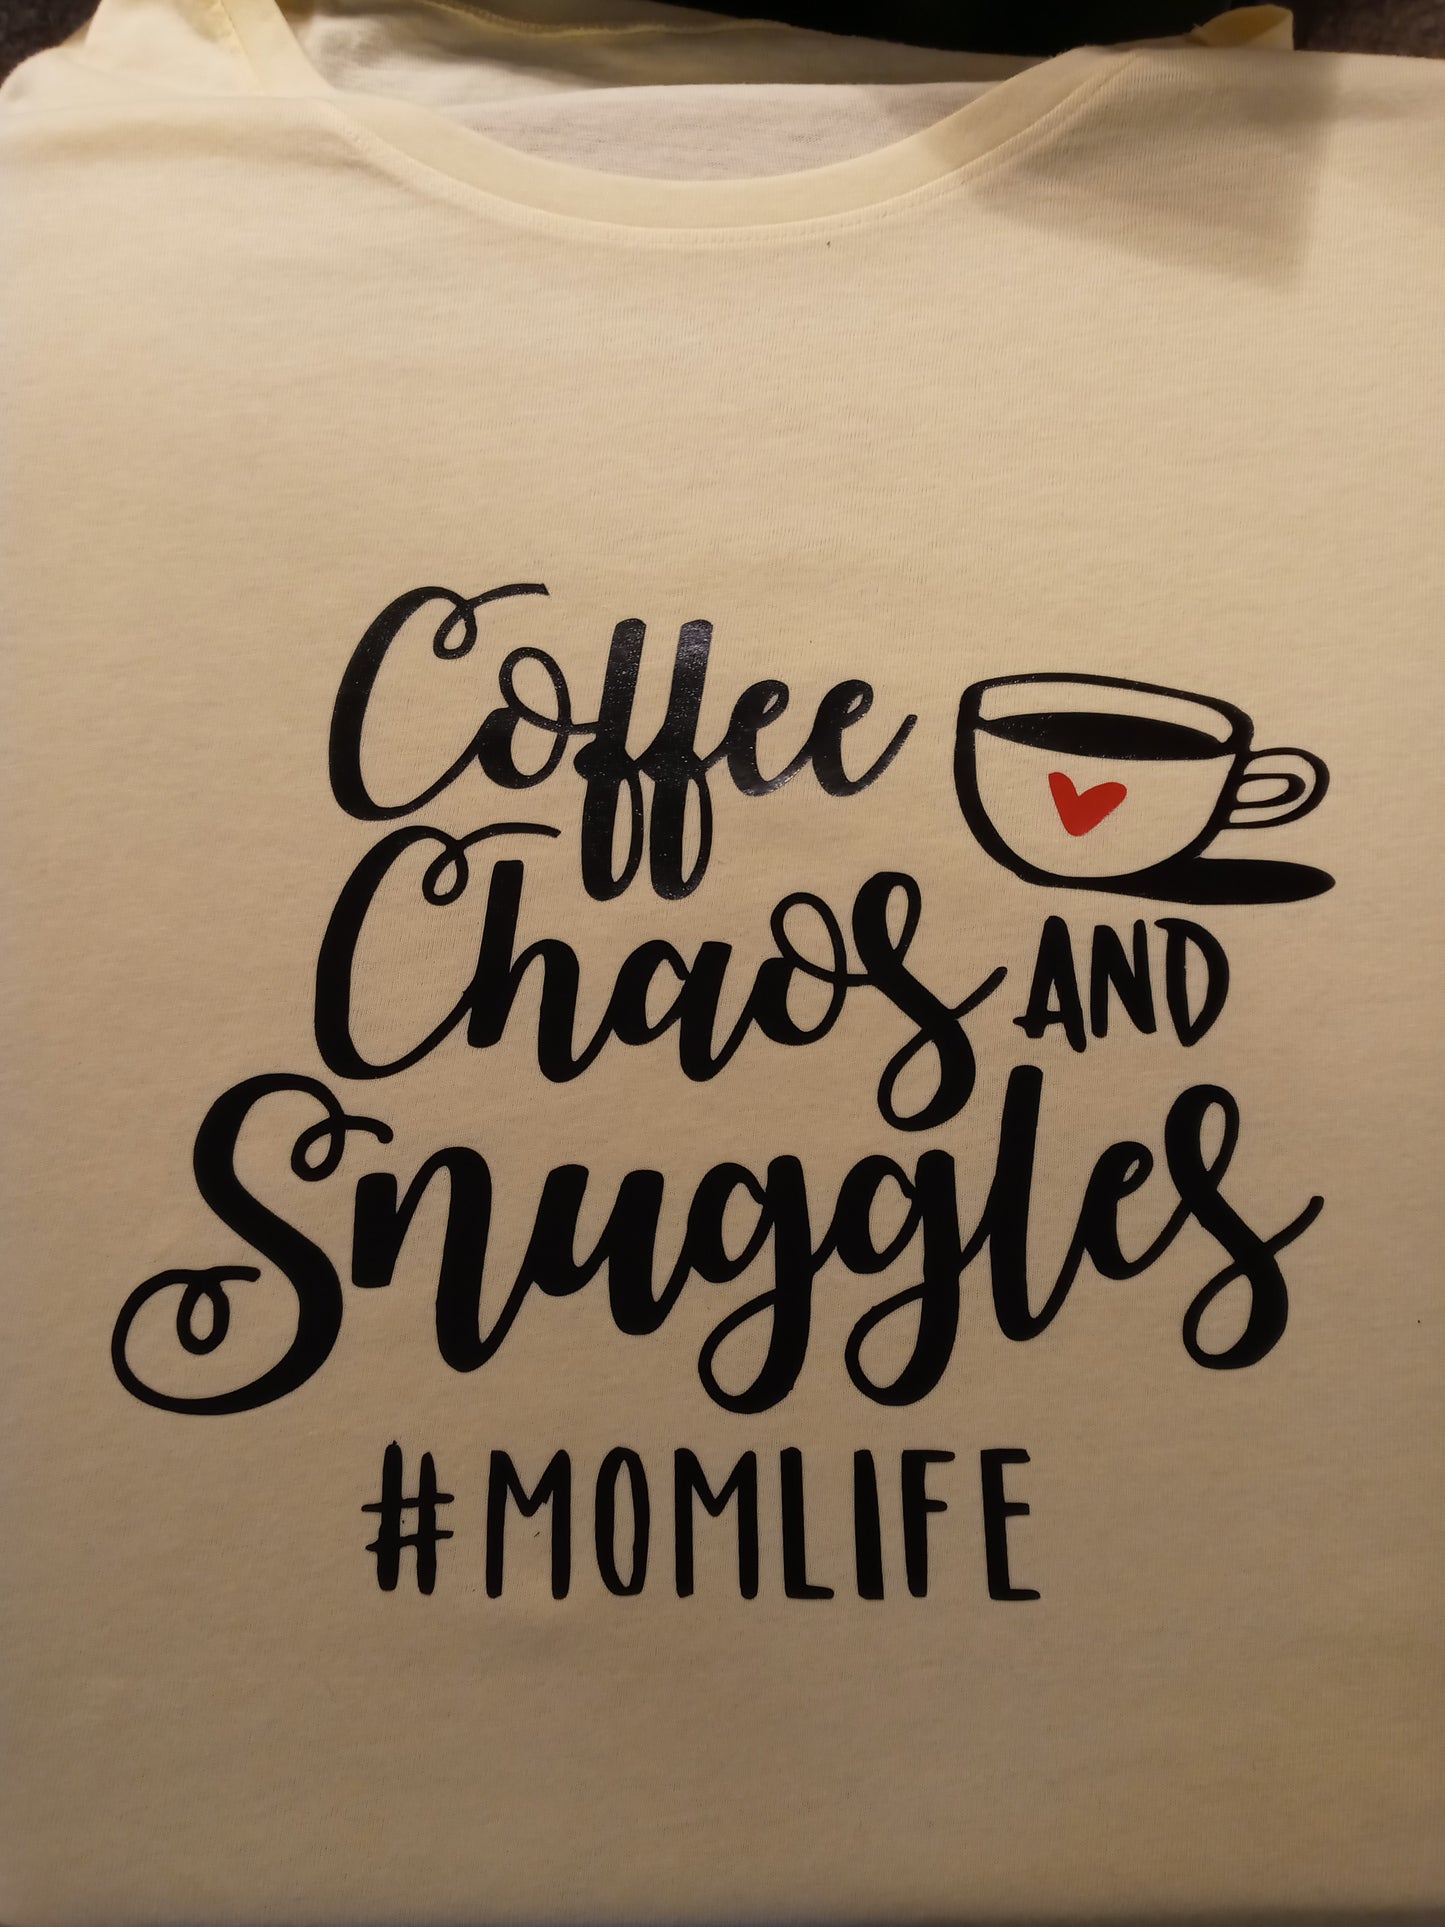 Coffee, Chaos and Snuggles